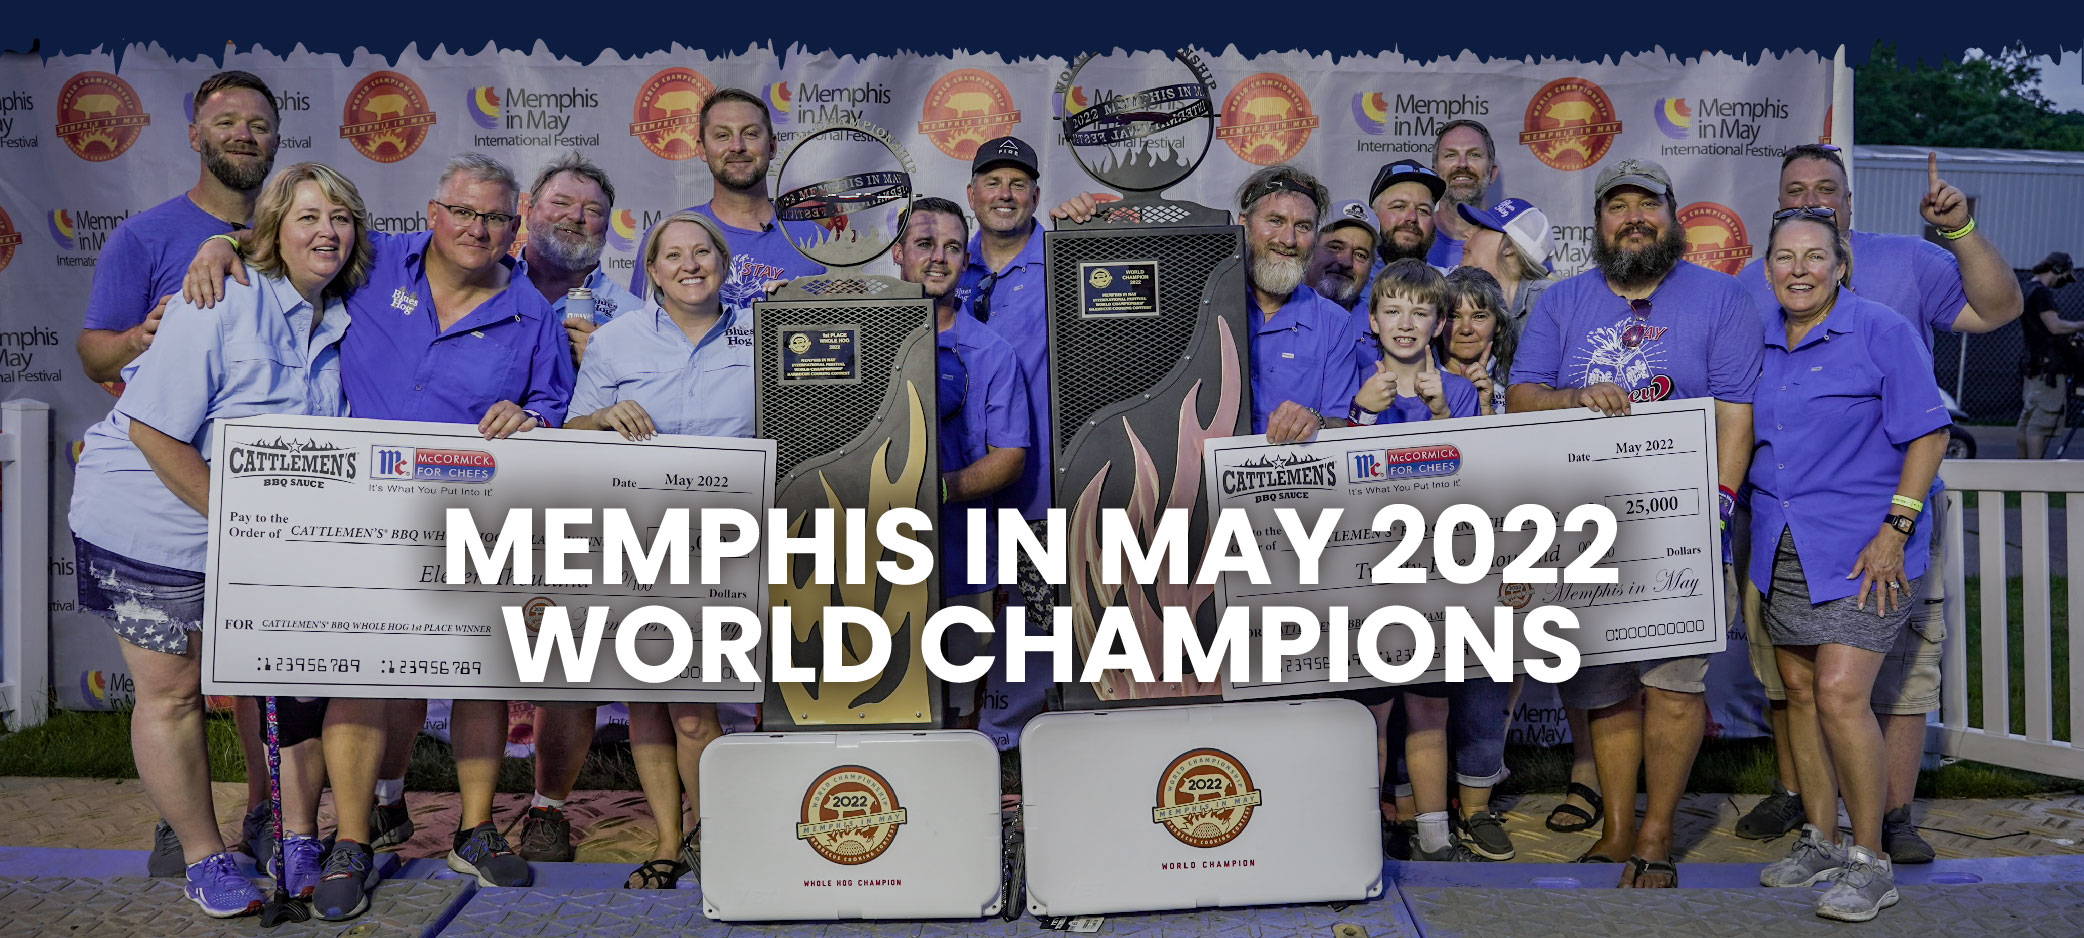 memphis in may world champions